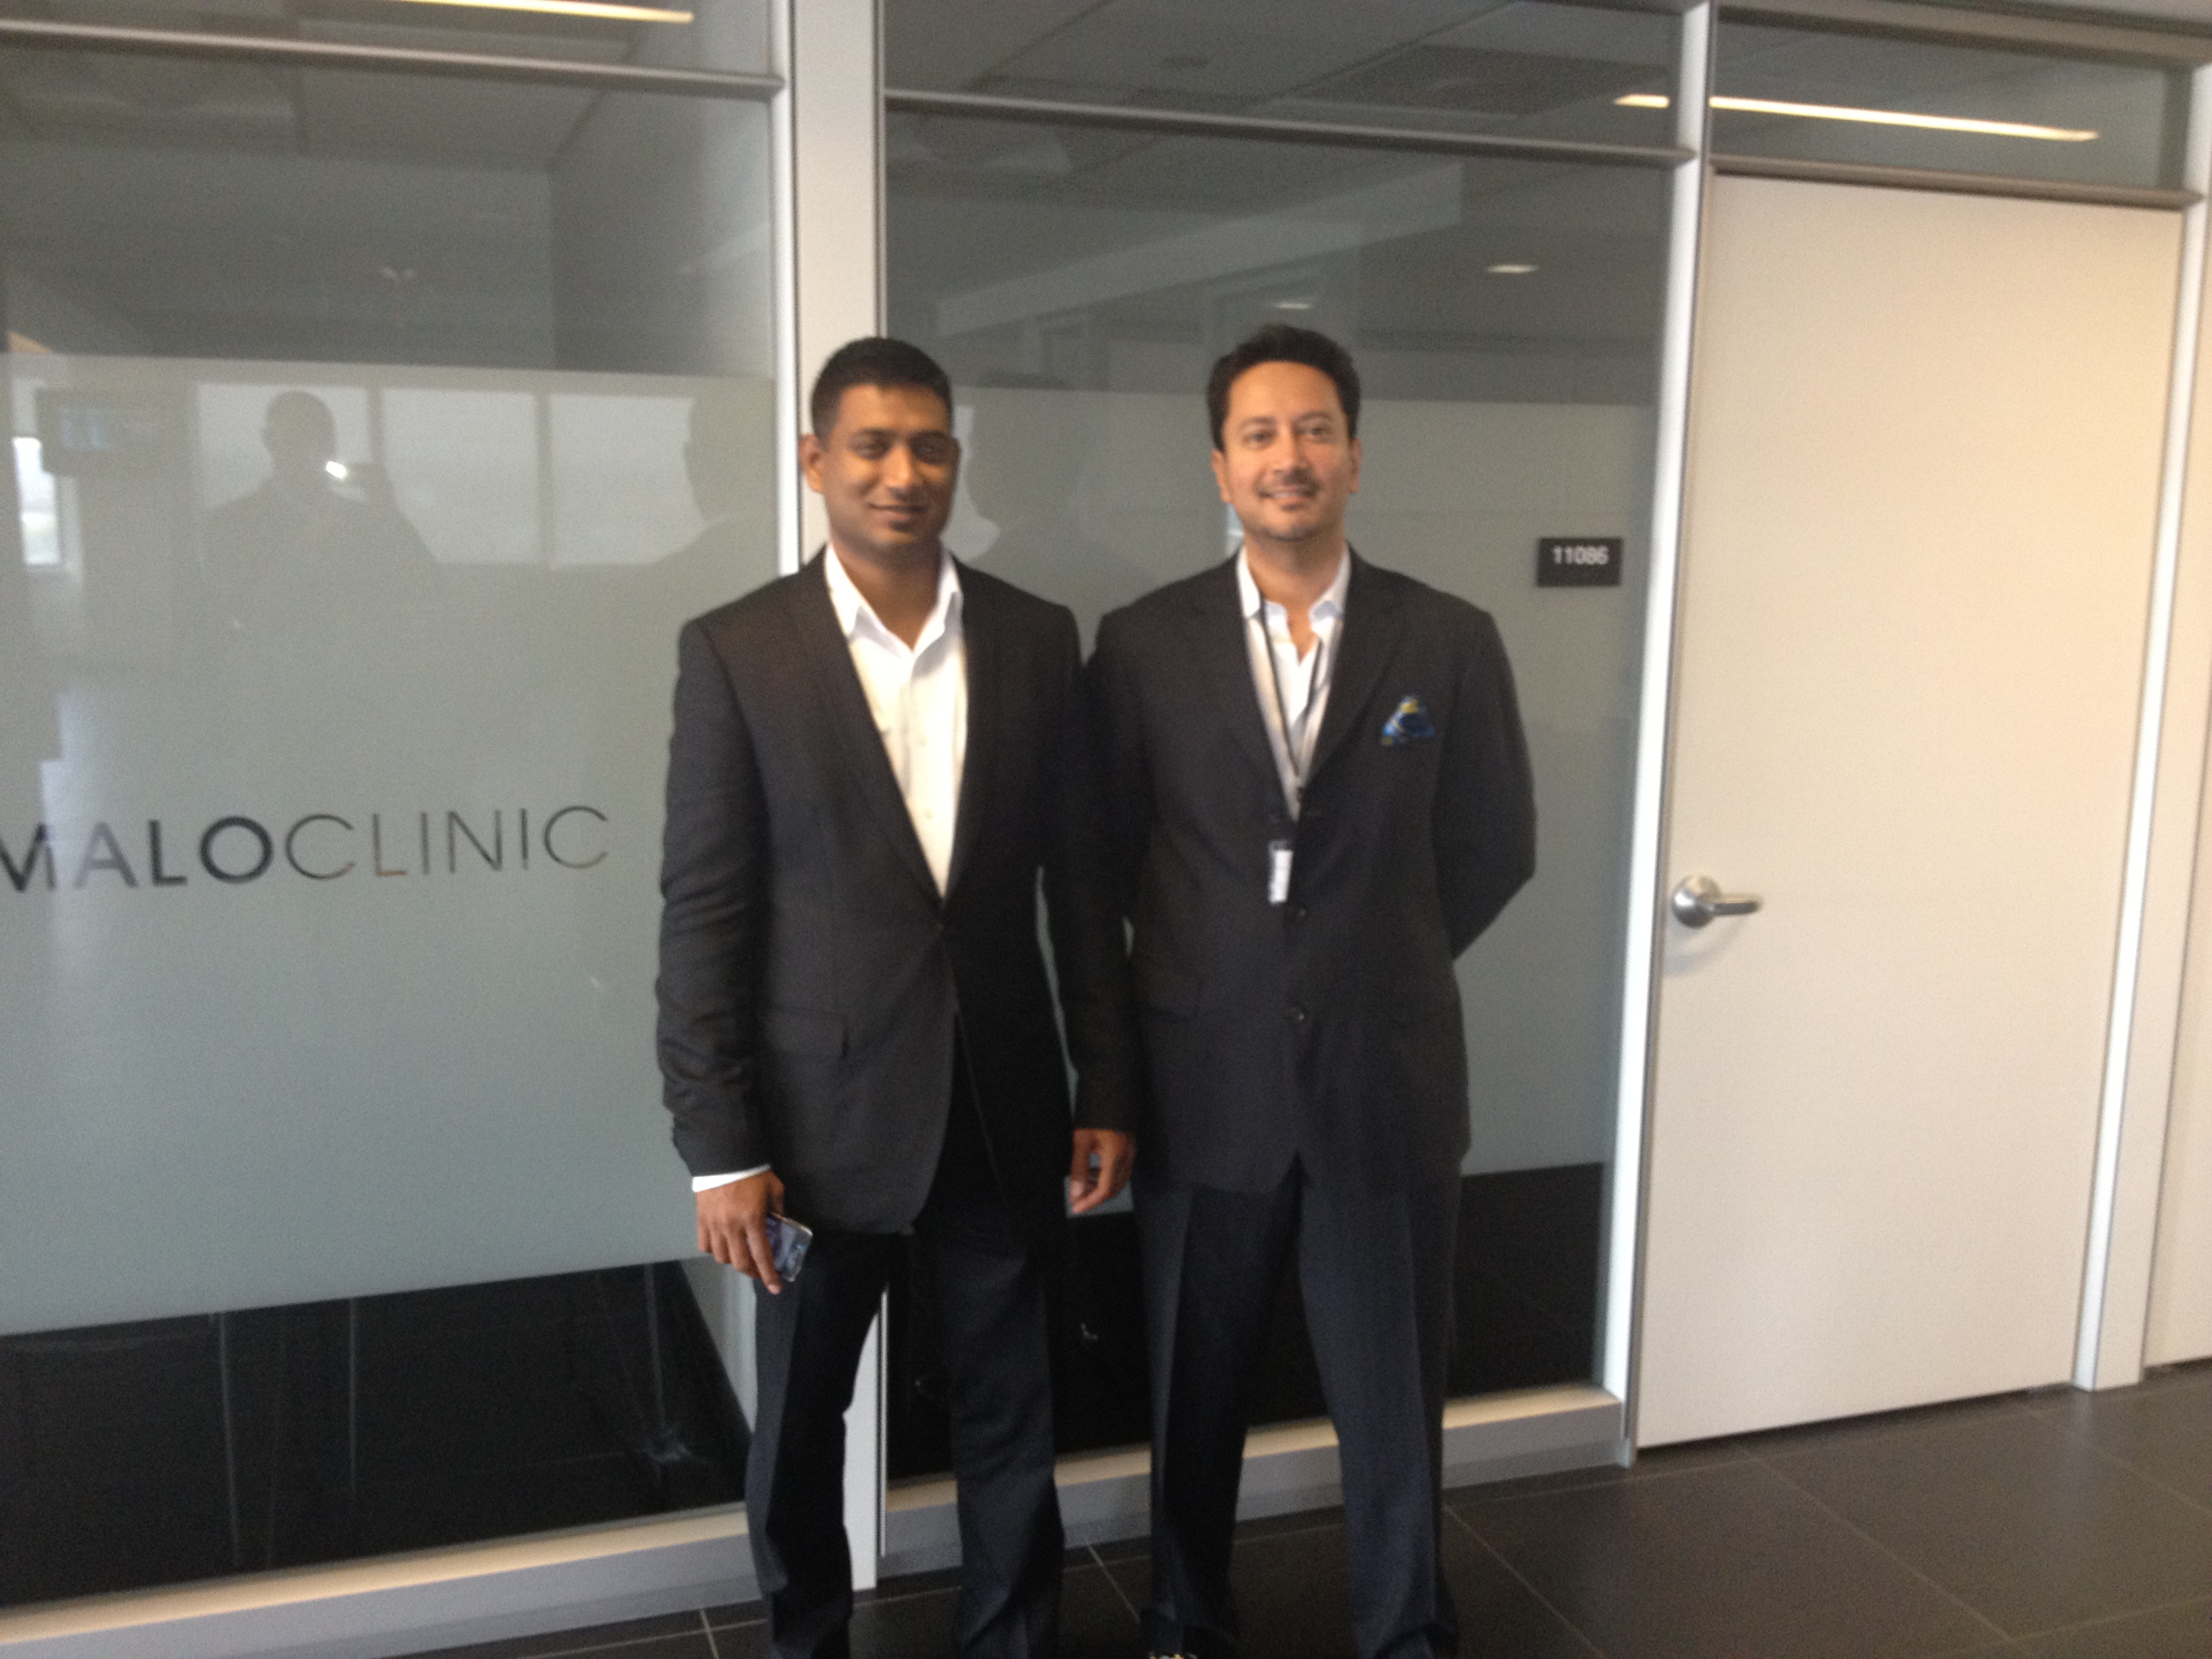 Dr. Atcha and Dr. Shakeel at the Malo Clinic